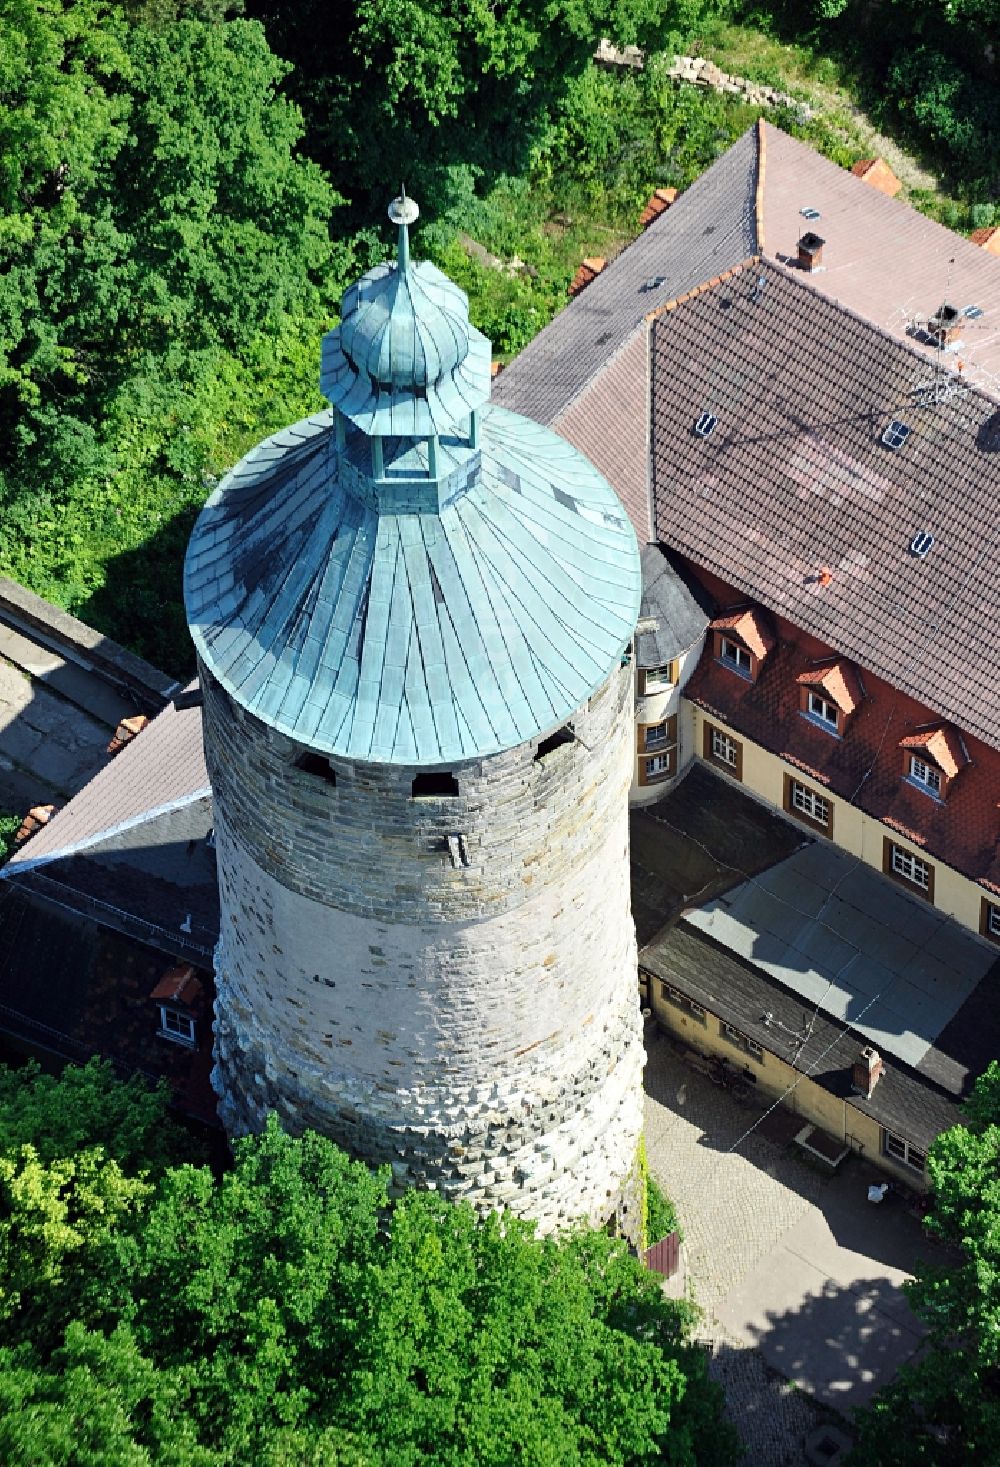 Tonndorf from above - Castle Tonndorf in the town of Tonndorf in Thuringia